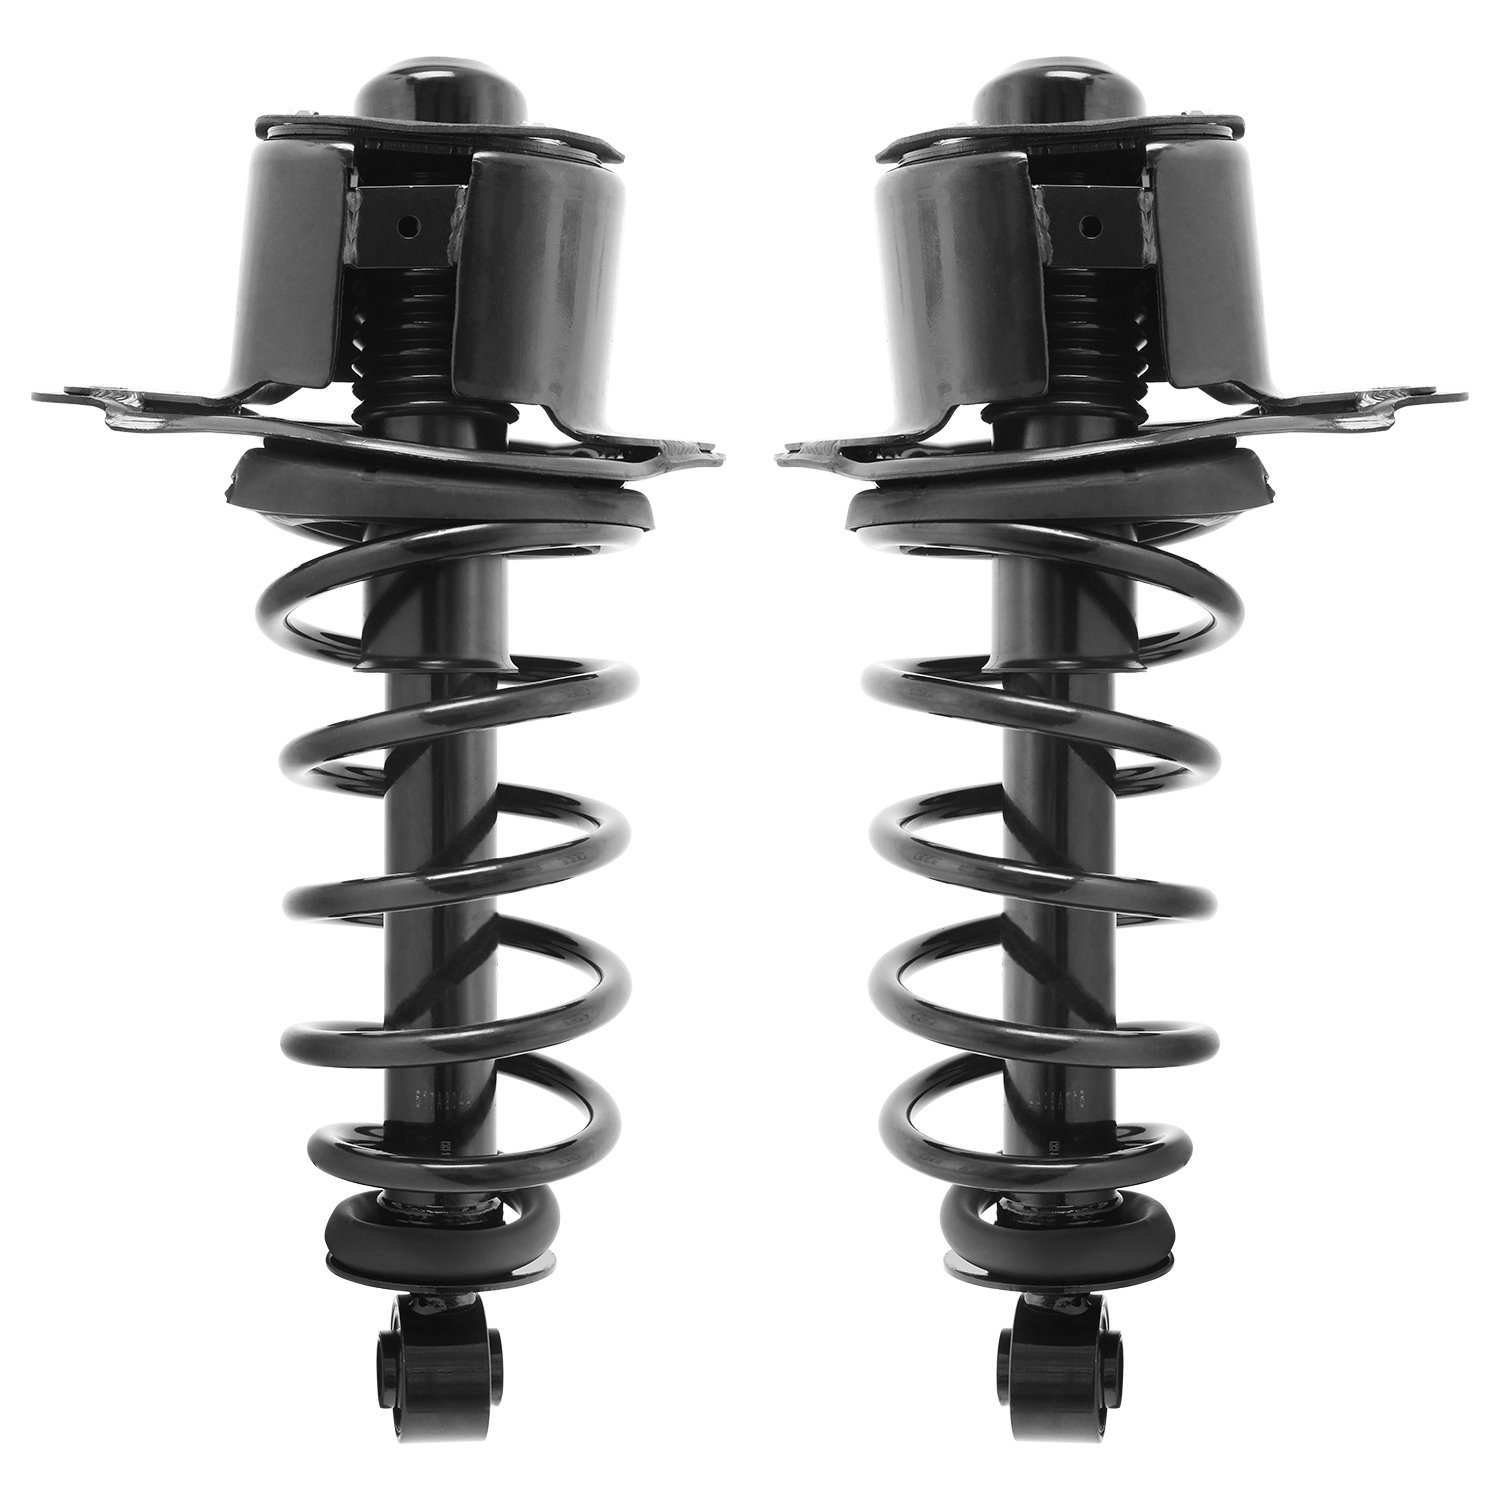 2-15043-15044-001 Suspension Strut & Coil Spring Assembly Set Fits Select Ford Taurus, Mercury Sable